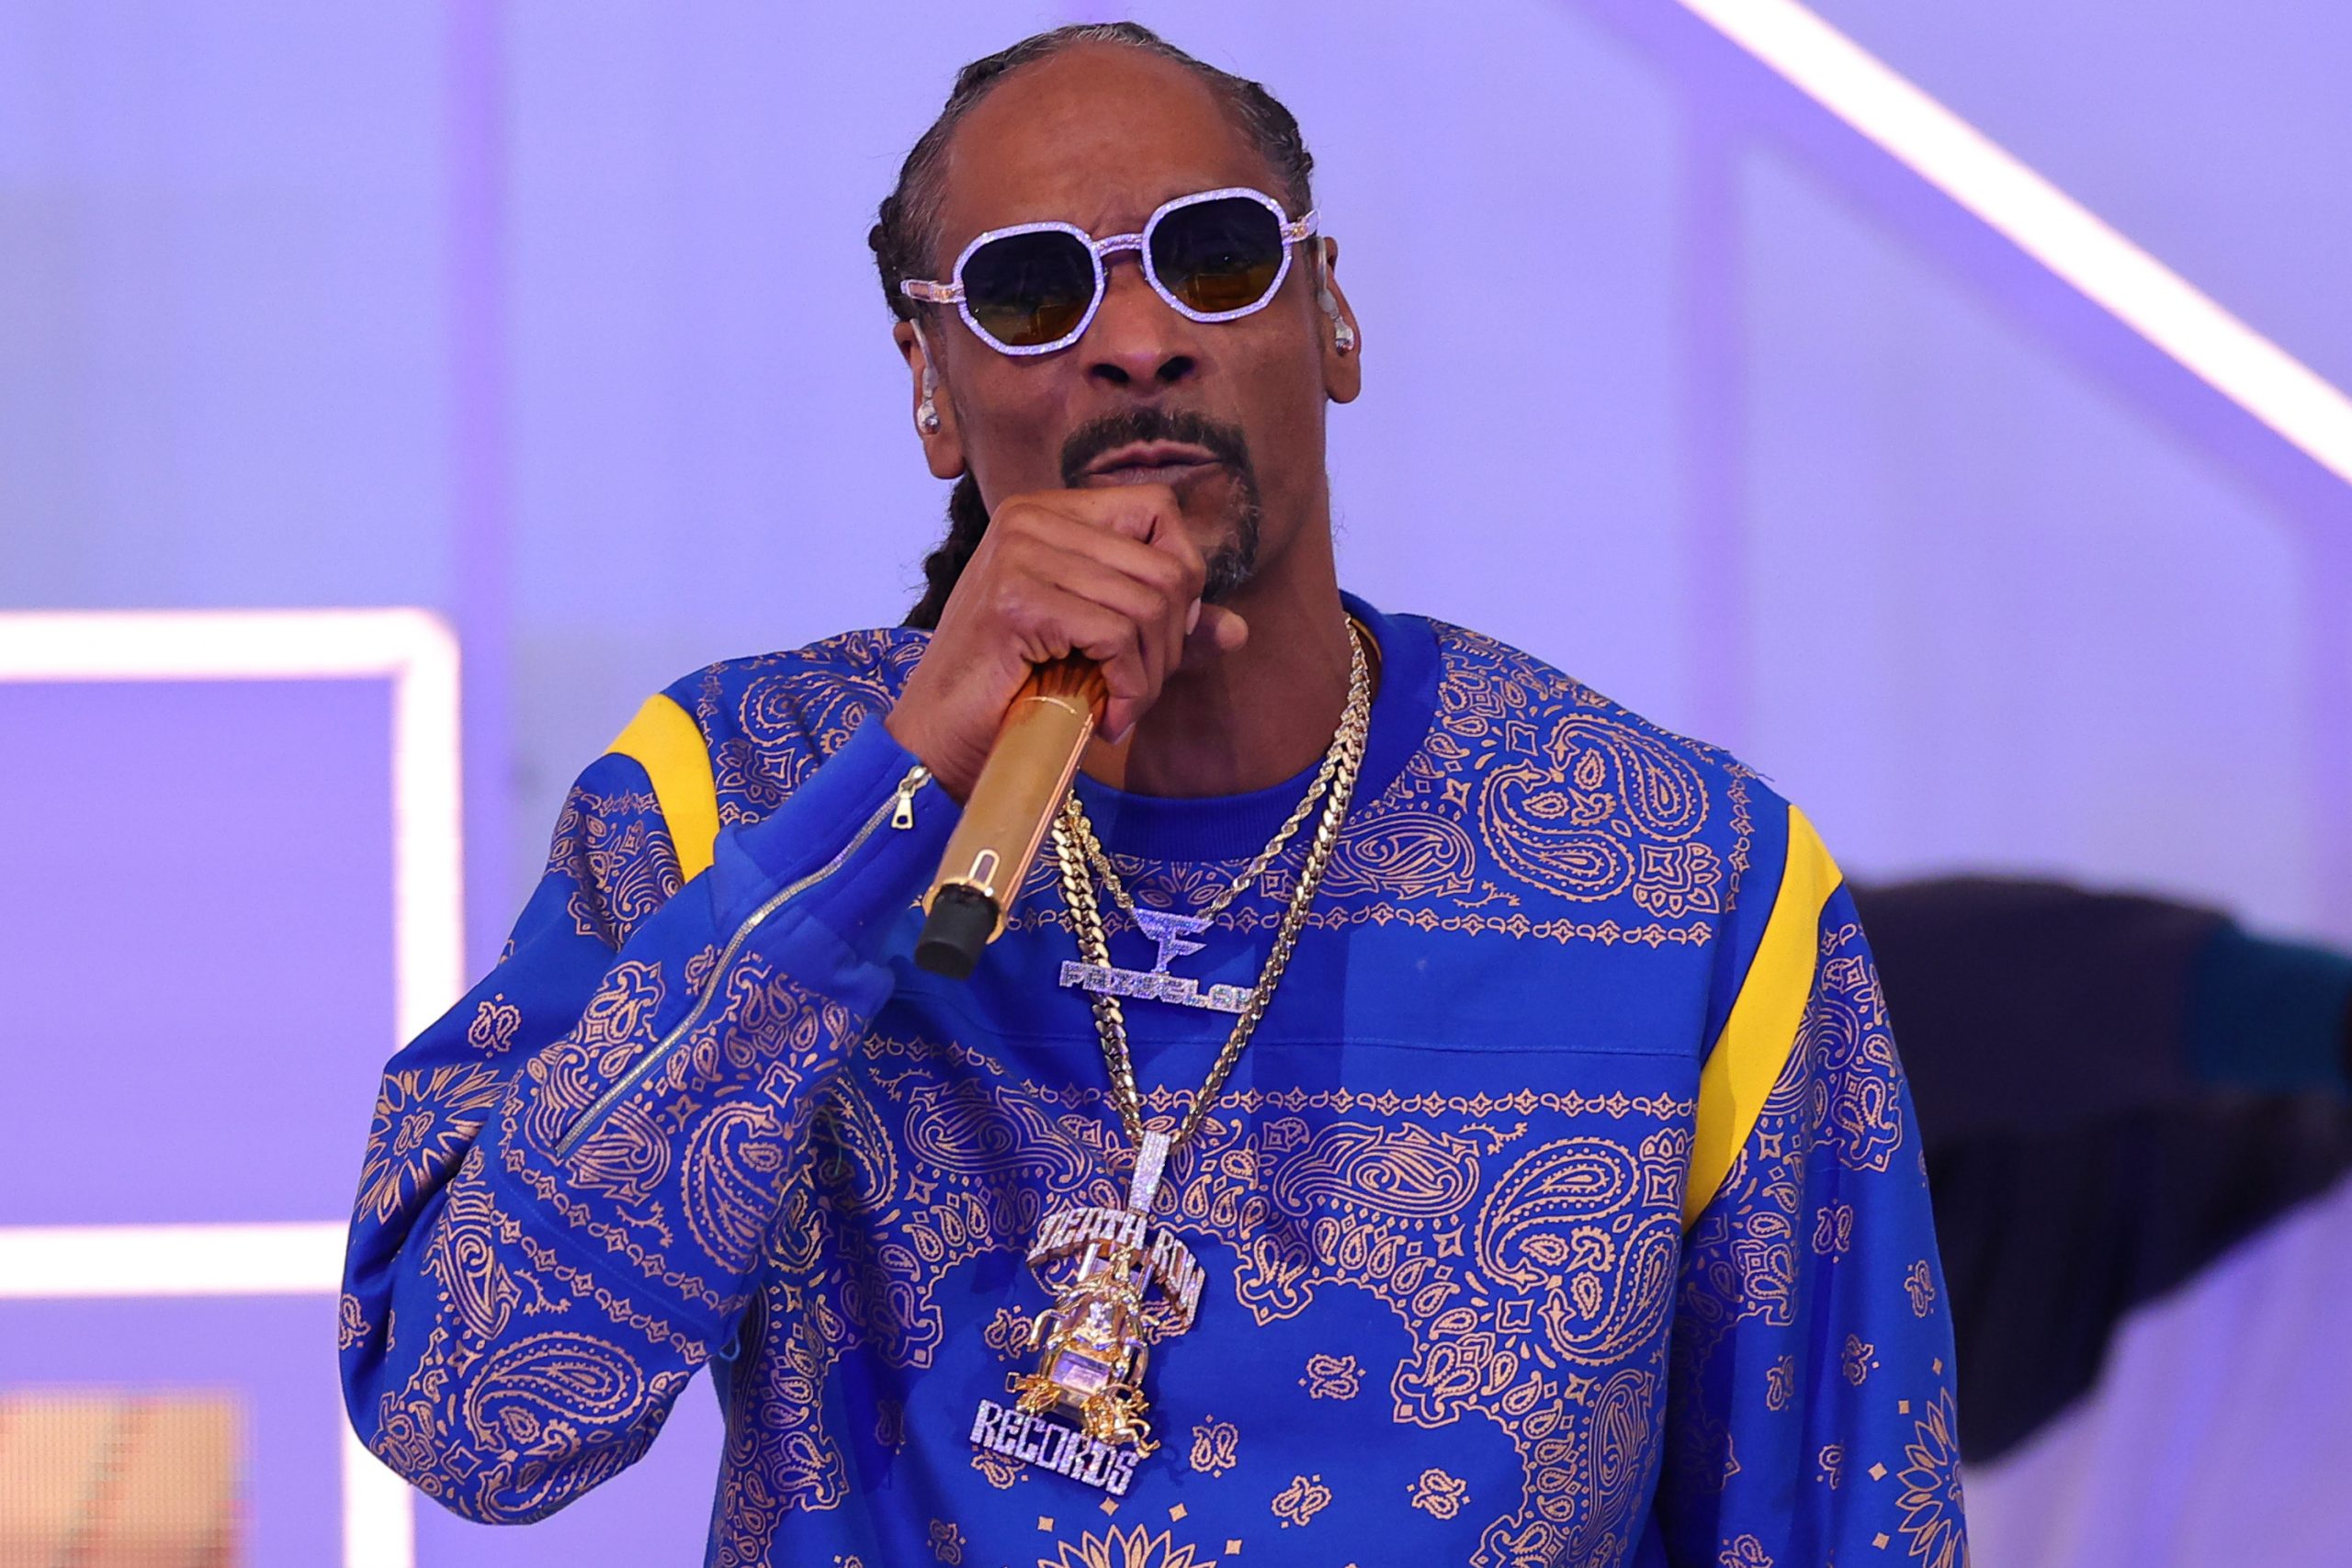 Snoop Dogg performing at the Super Bowl halftime show